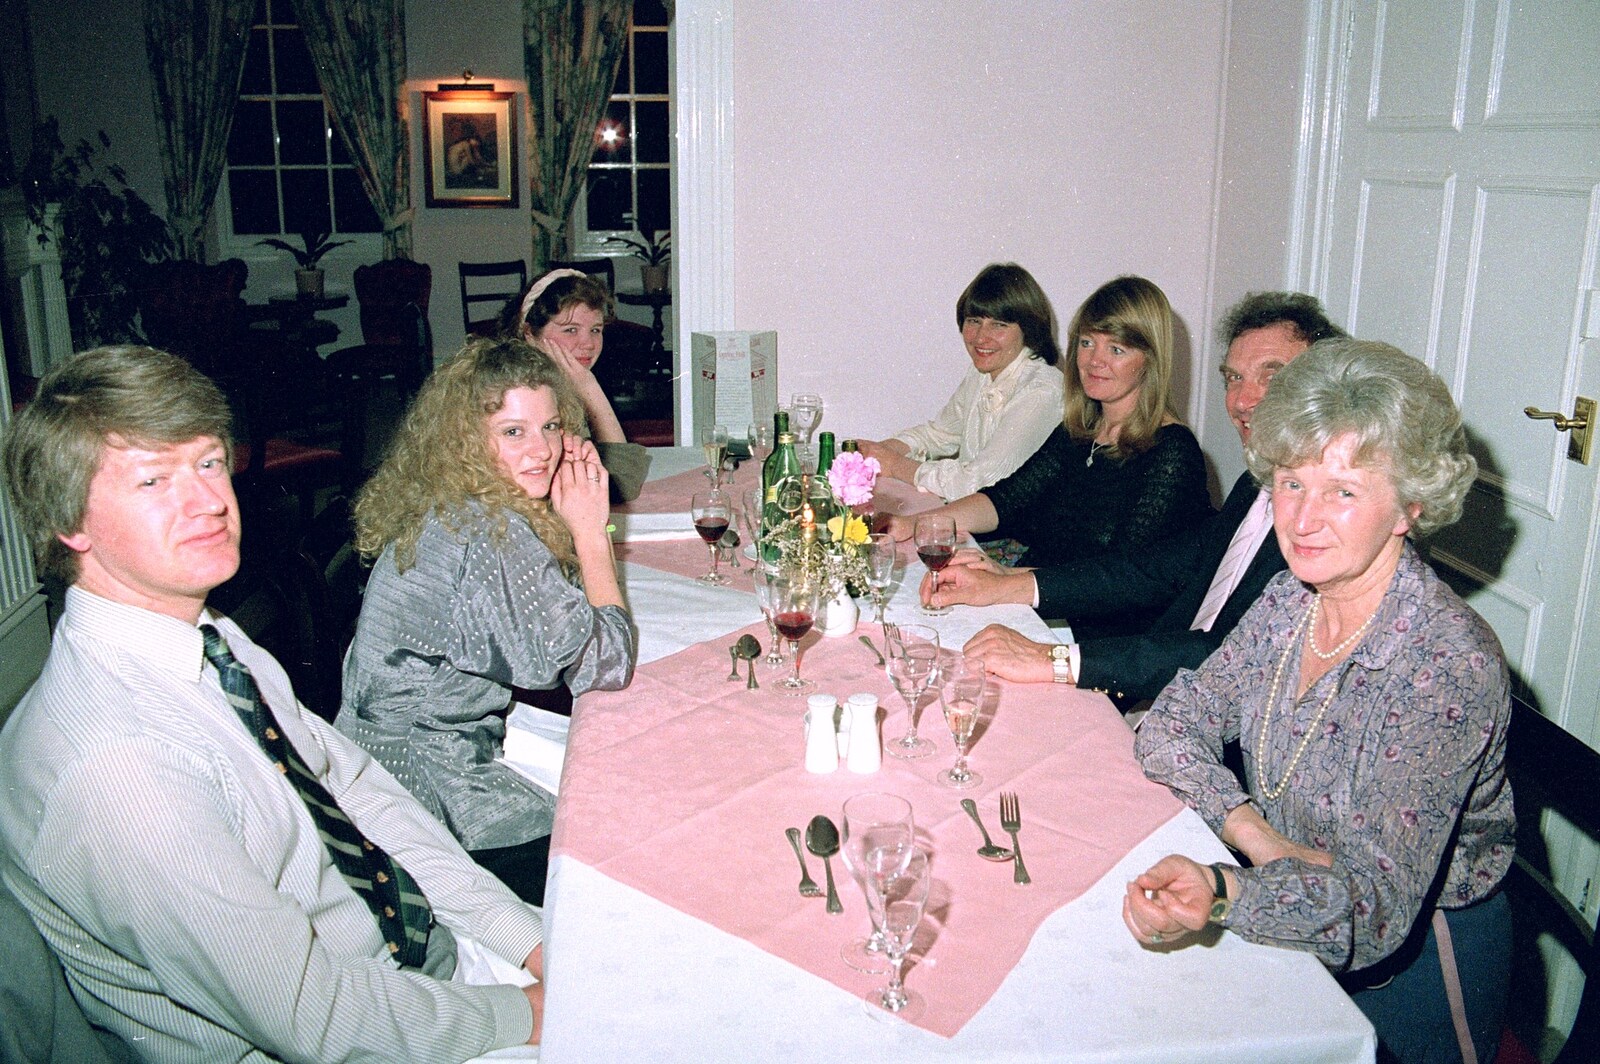 Neil, Kim, Sis, Caroline, Mother, Mike and Grandmother from Mother's 40th, Burton, Christchurch, Dorset - 18th April 1987